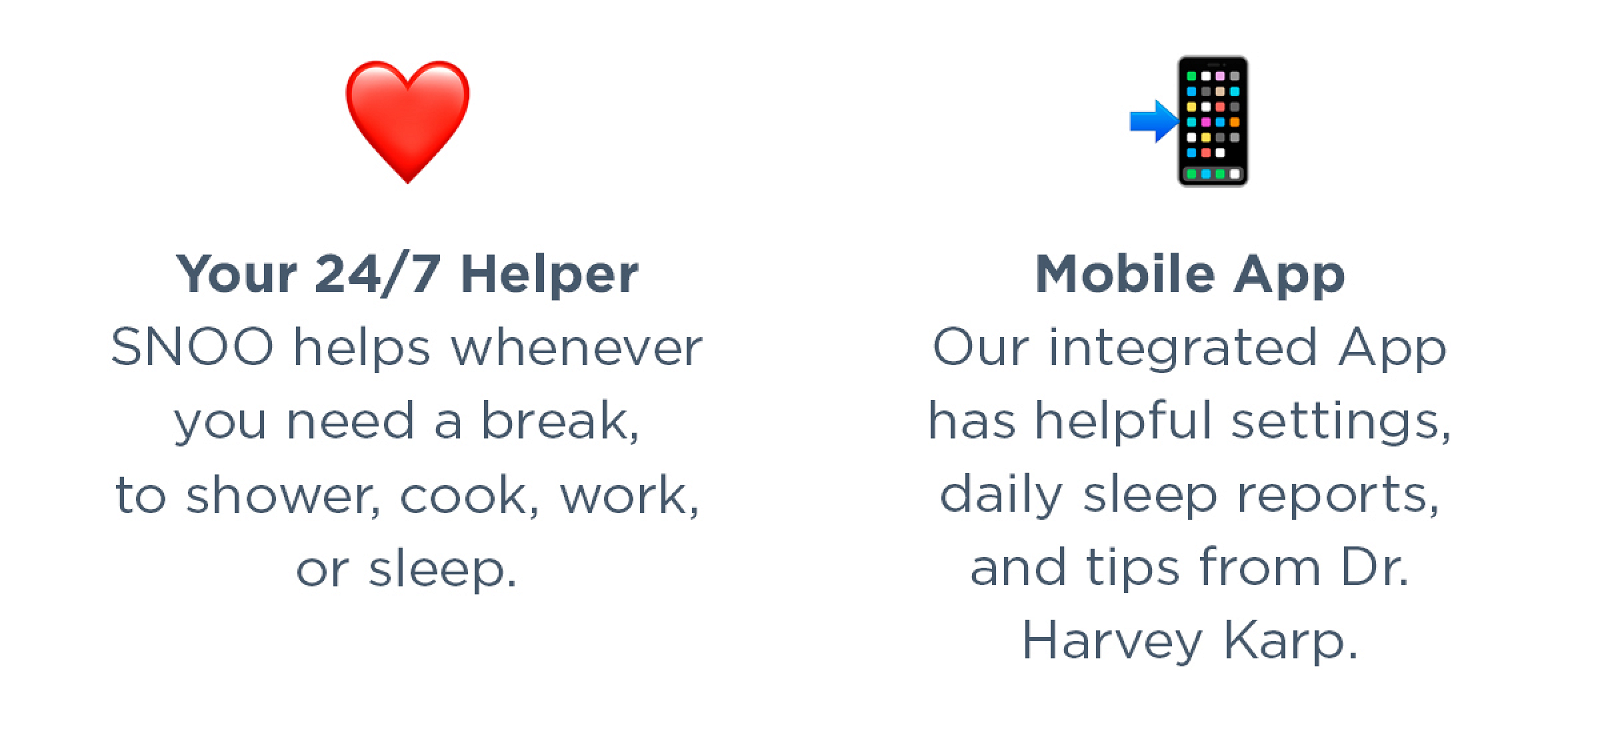 Your 24/7 helper: SNOO helps whenever you need a break, to shower, cook, work, or sleep. Mobile App: Our integrated app has helpful settings, daily sleep reports, and tips from Dr. Harvey Karp.